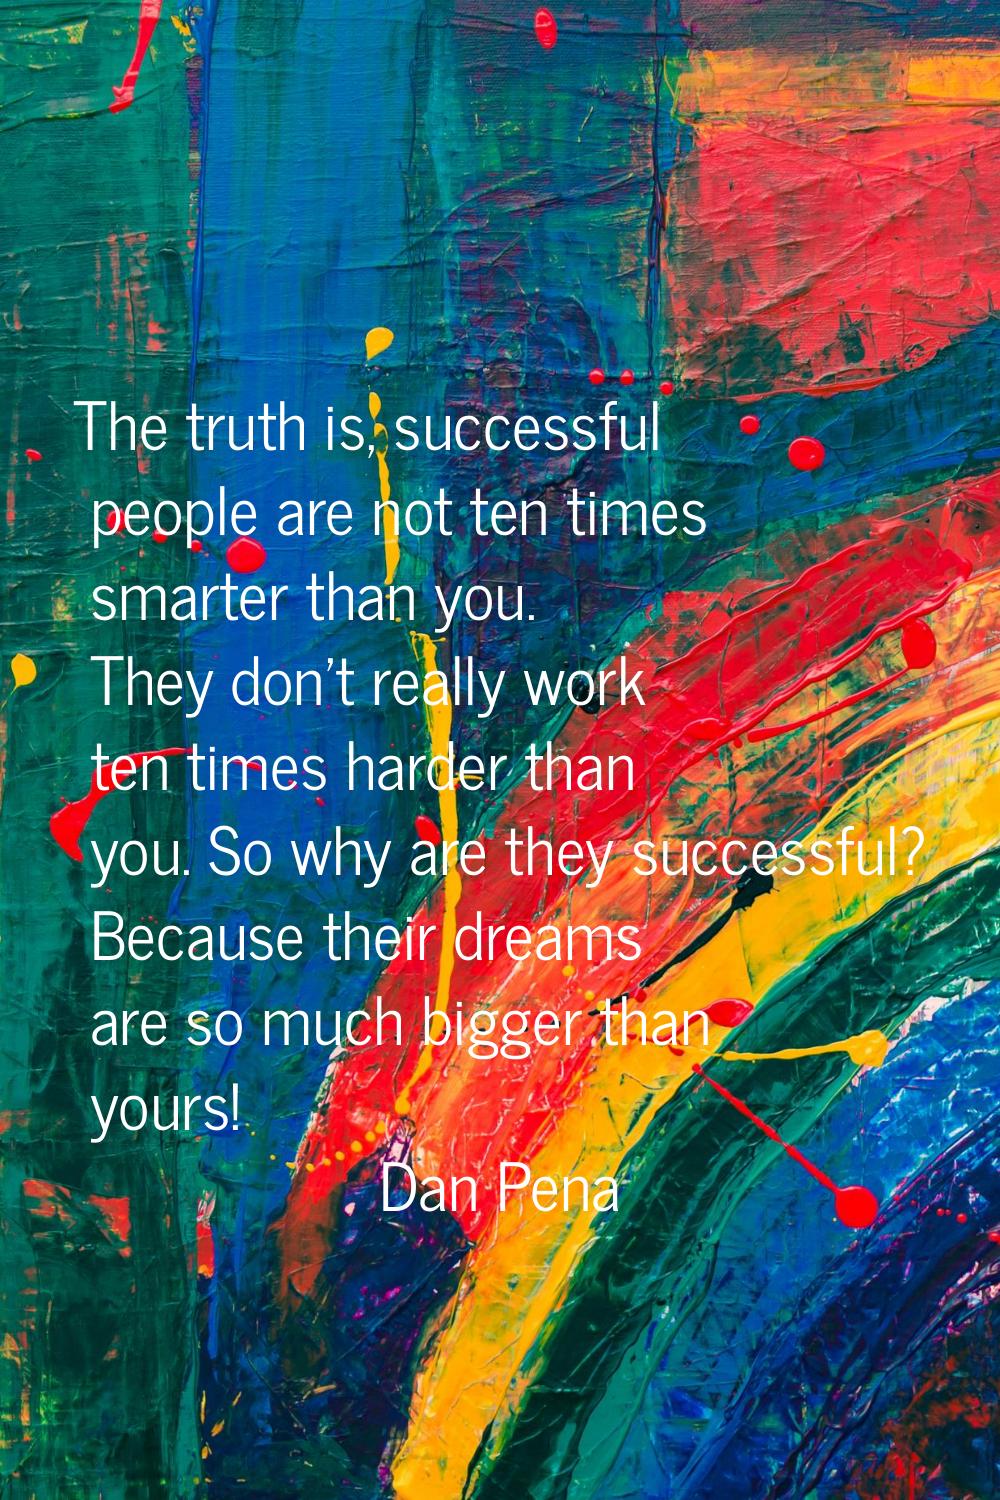 The truth is, successful people are not ten times smarter than you. They don't really work ten time